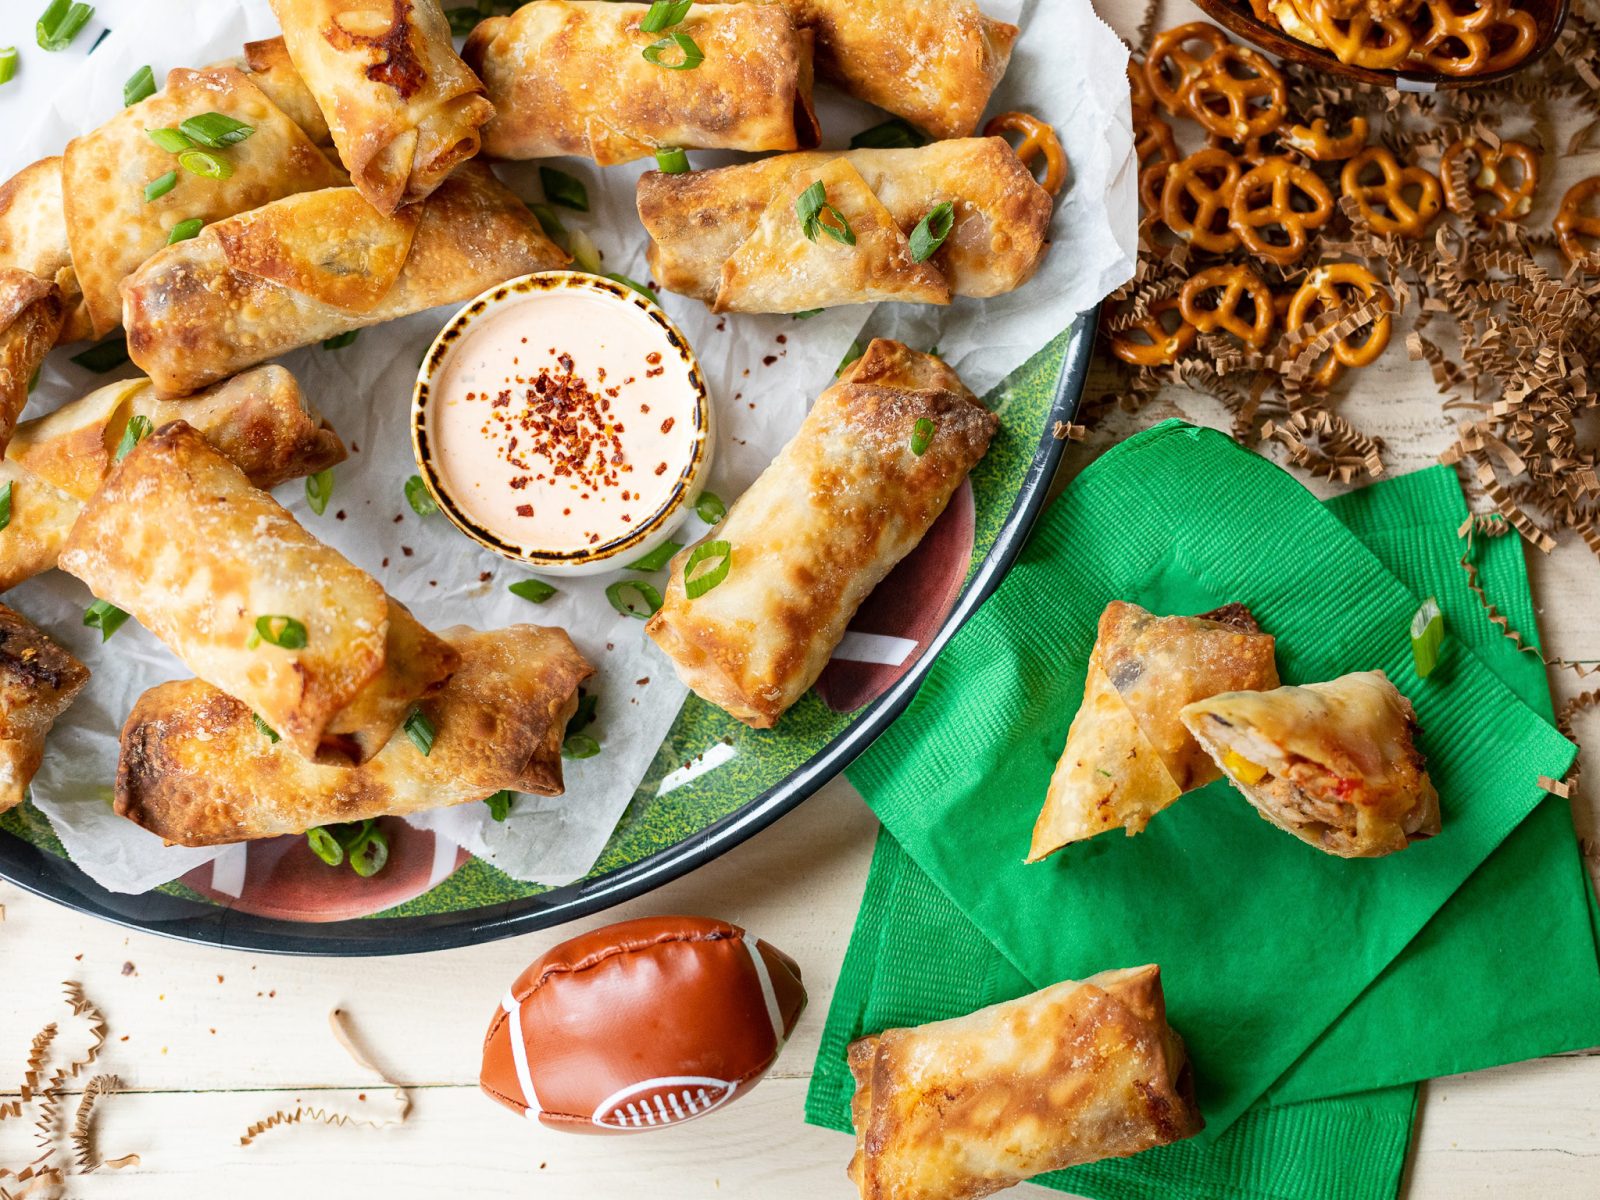 Grab Hatfield Marinated Pork For Your Game Day Gatherings – Try My Air Fryer Southwest Egg Rolls